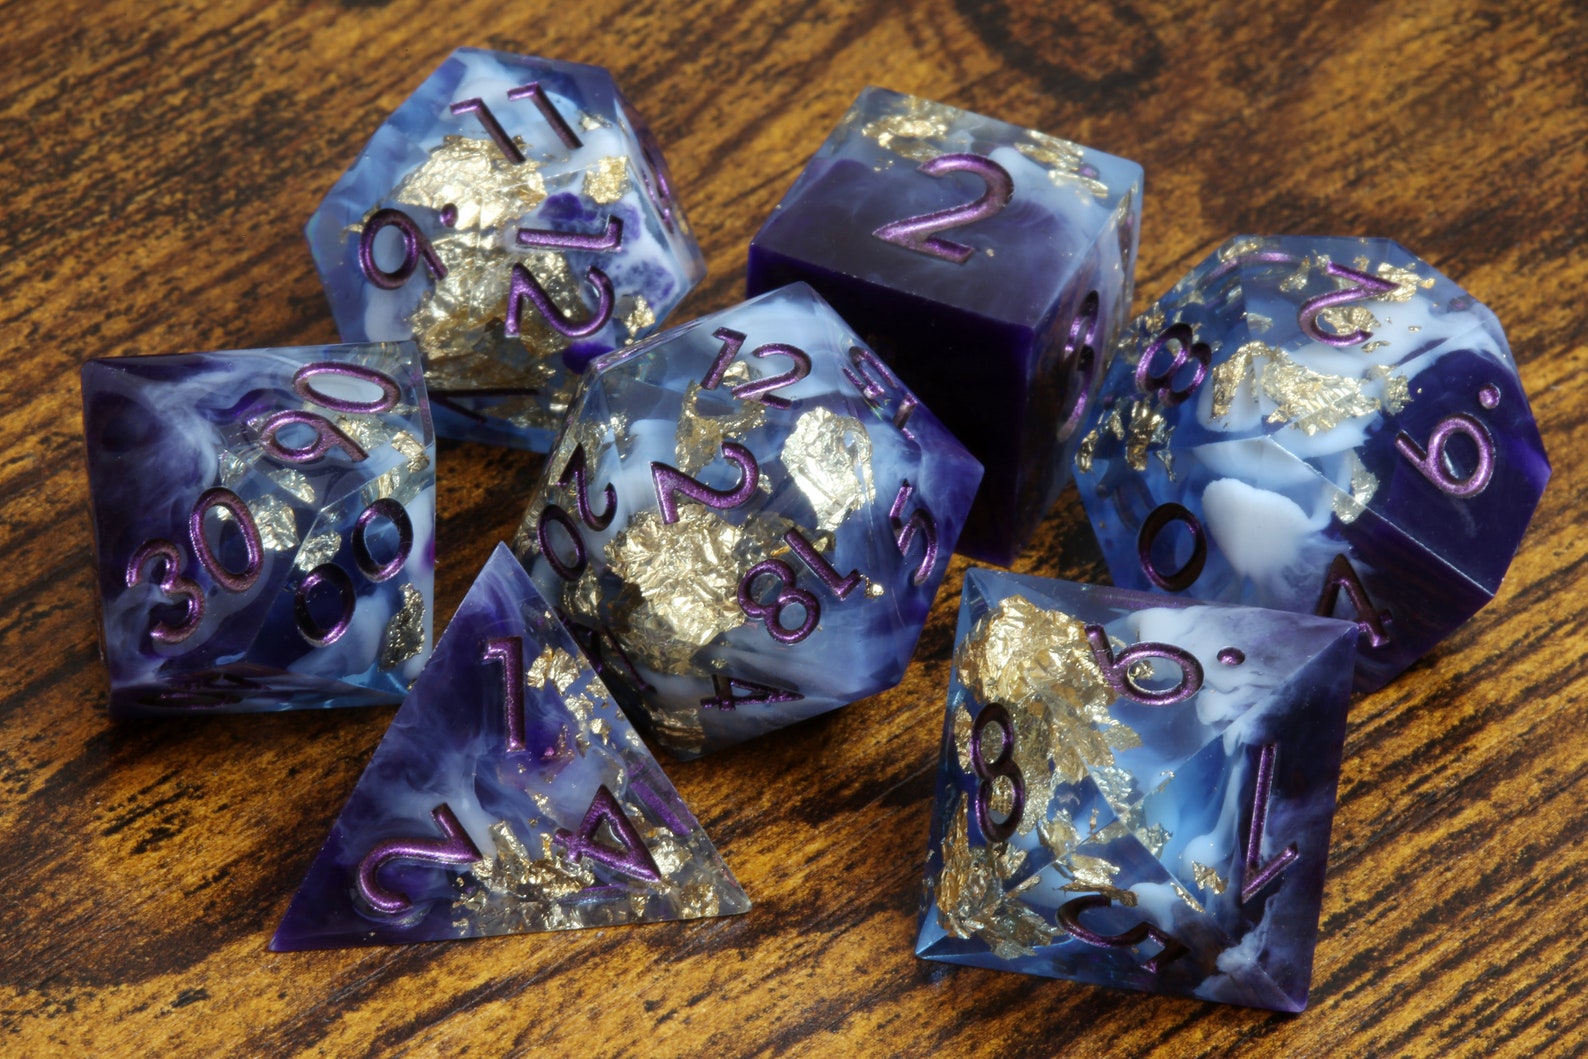 Majestic Twilight dice set - sharp edge dice set with deep purple and white resin with gold flakes - The Wizard's Vault